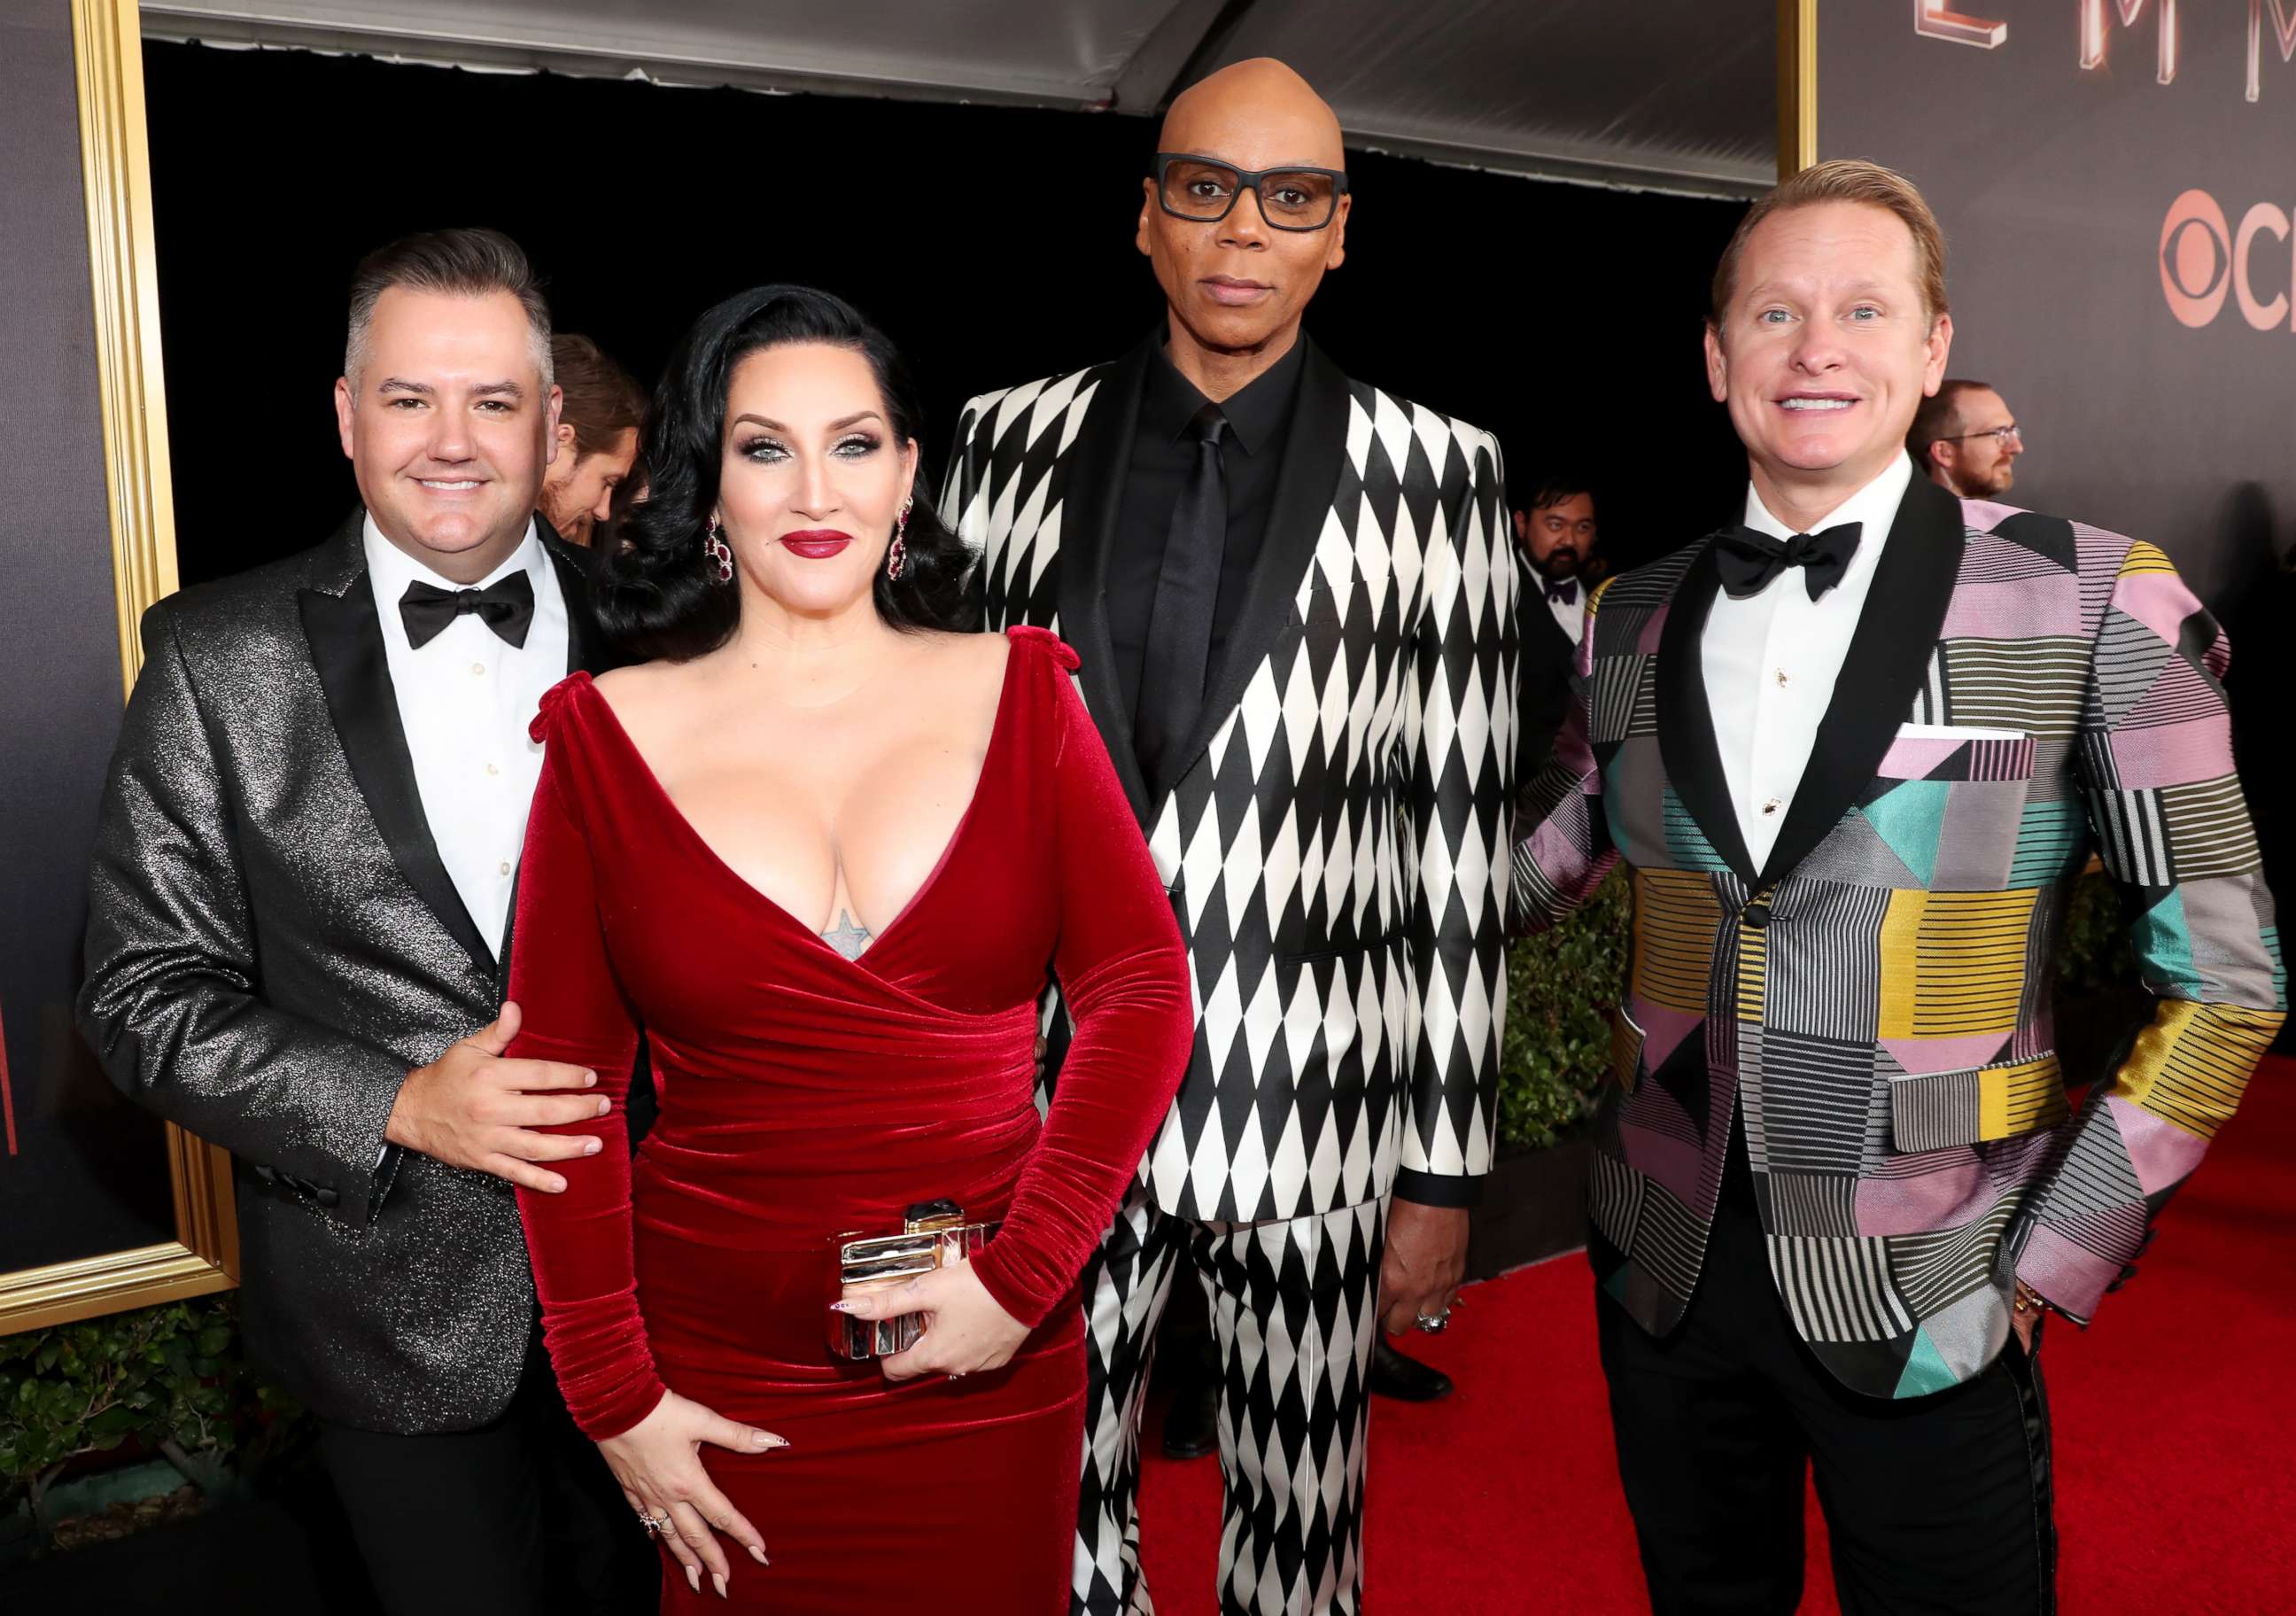 PHOTO: (L-R) TV personalities Ross Mathews, Michelle Visage, RuPaul, and Carson Kressley walk the red carpet during the 69th Annual Primetime Emmy Awards at Microsoft Theater on September 17, 2017 in Los Angeles, California.  